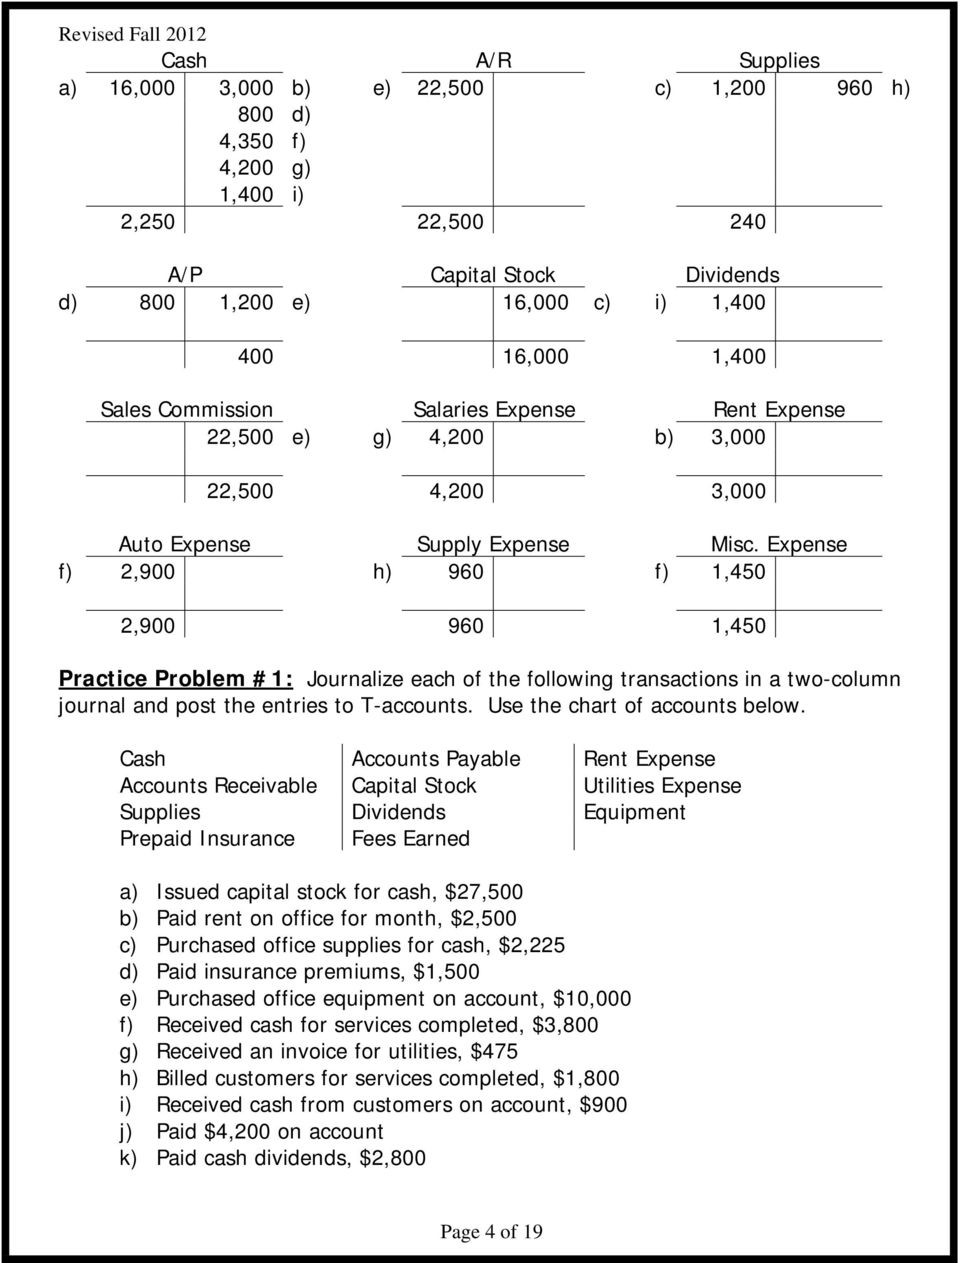 Expense f) 2,900 h) 960 f) 1,450 2,900 960 1,450 Practice Problem #1: Journalize each of the following transactions in a two-column journal and post the entries to T-accounts.